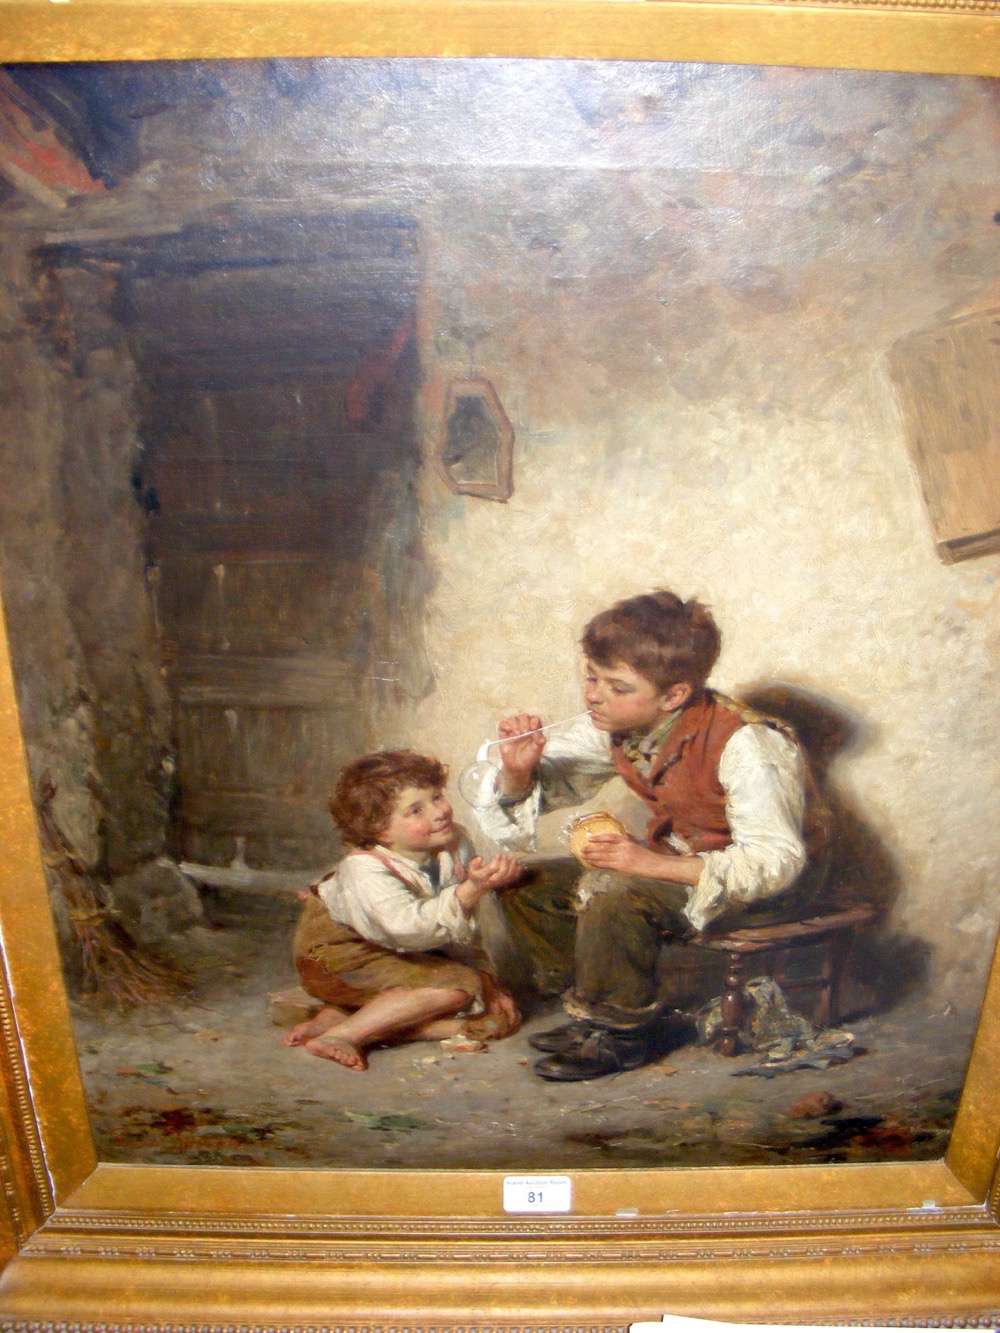 EDWIN THOMAS ROBERTS - 60cm x 48cm - oil on canvas "Blowing Bubbles" with signature bottom left